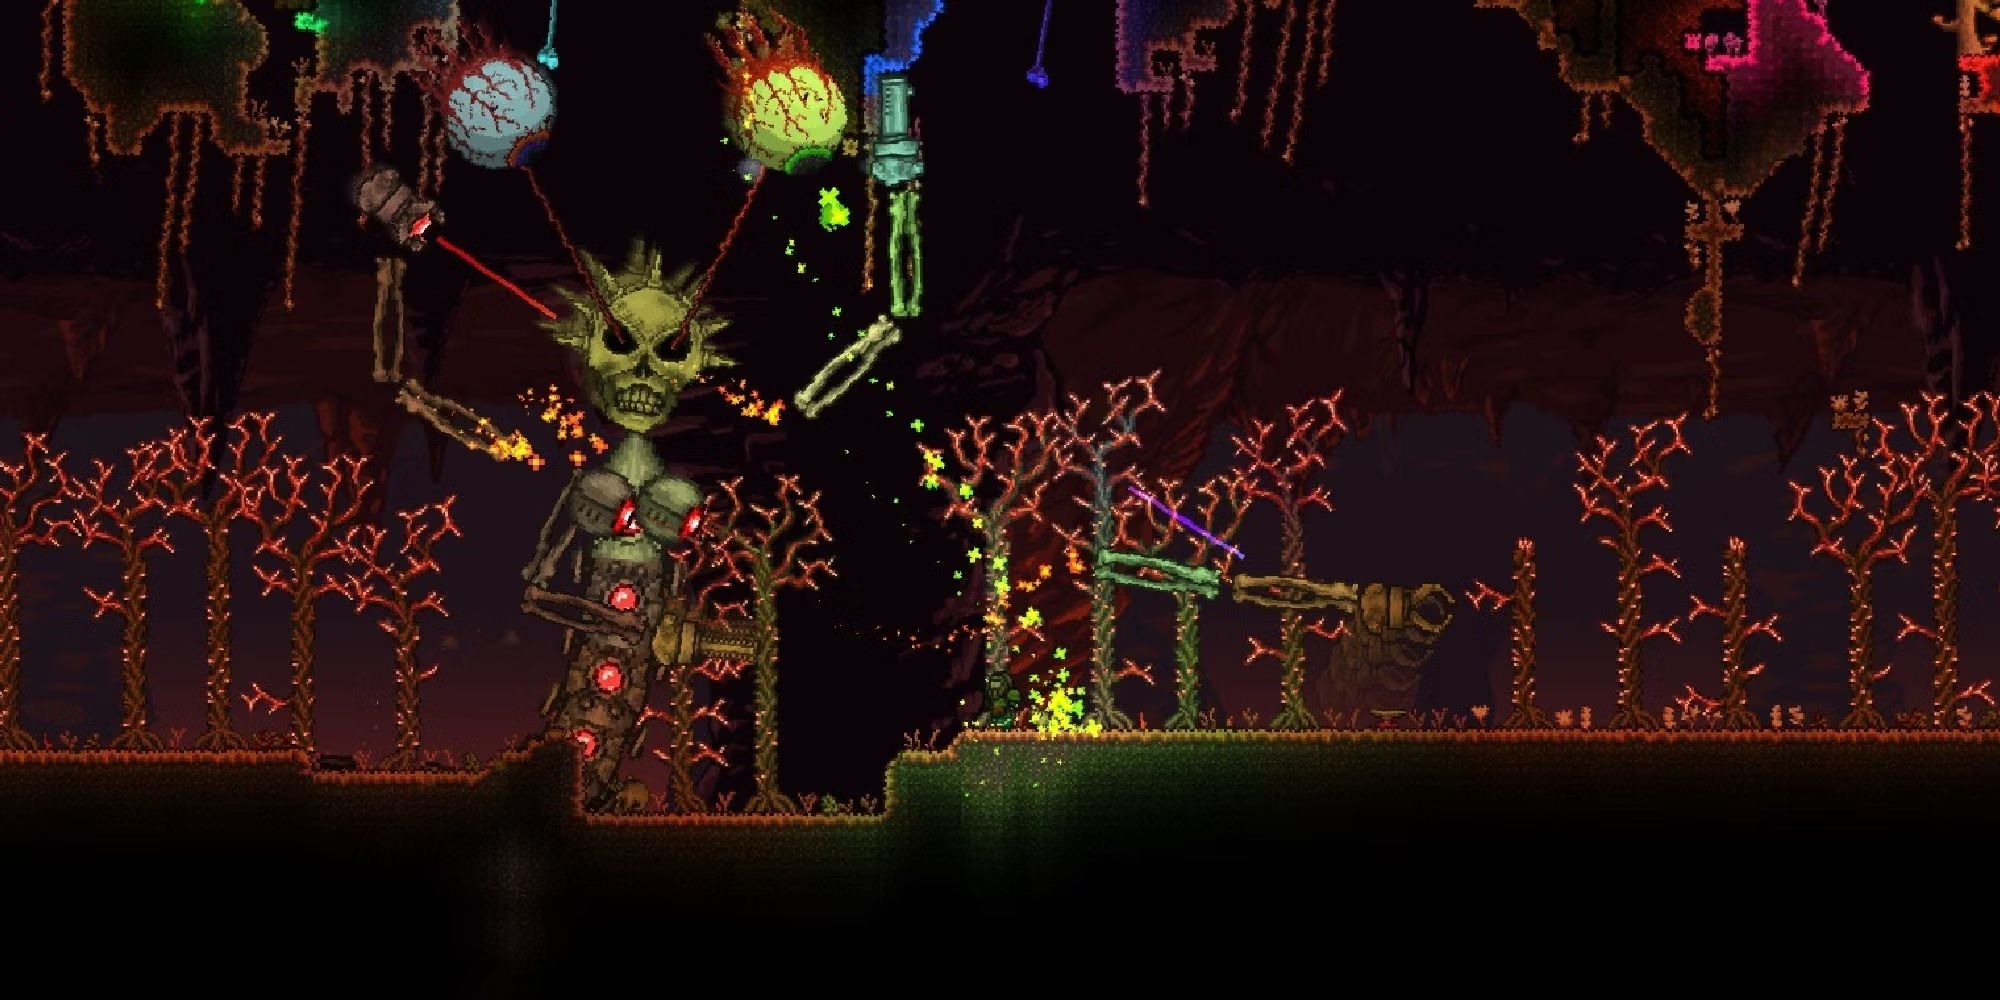 The player battles Mechdusa, the mechanical boss unique to the Everything seed in Terraria.